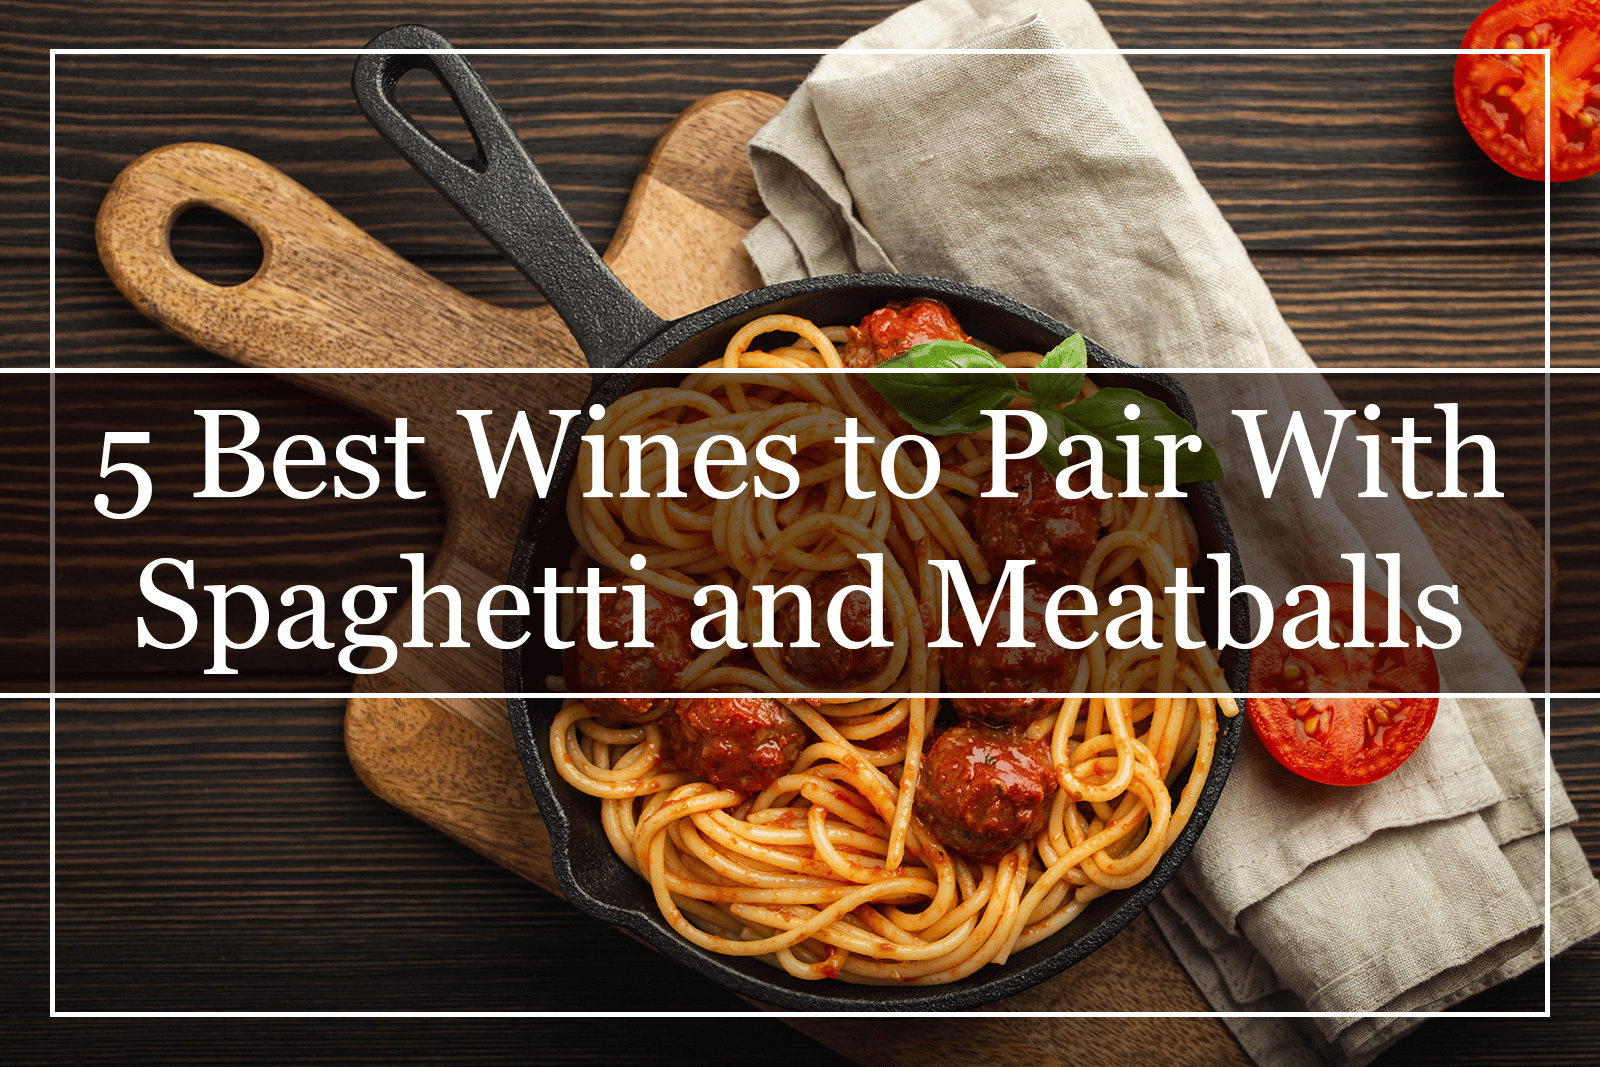 5 Best Wines to Pair With Spaghetti and Meatballs Featured